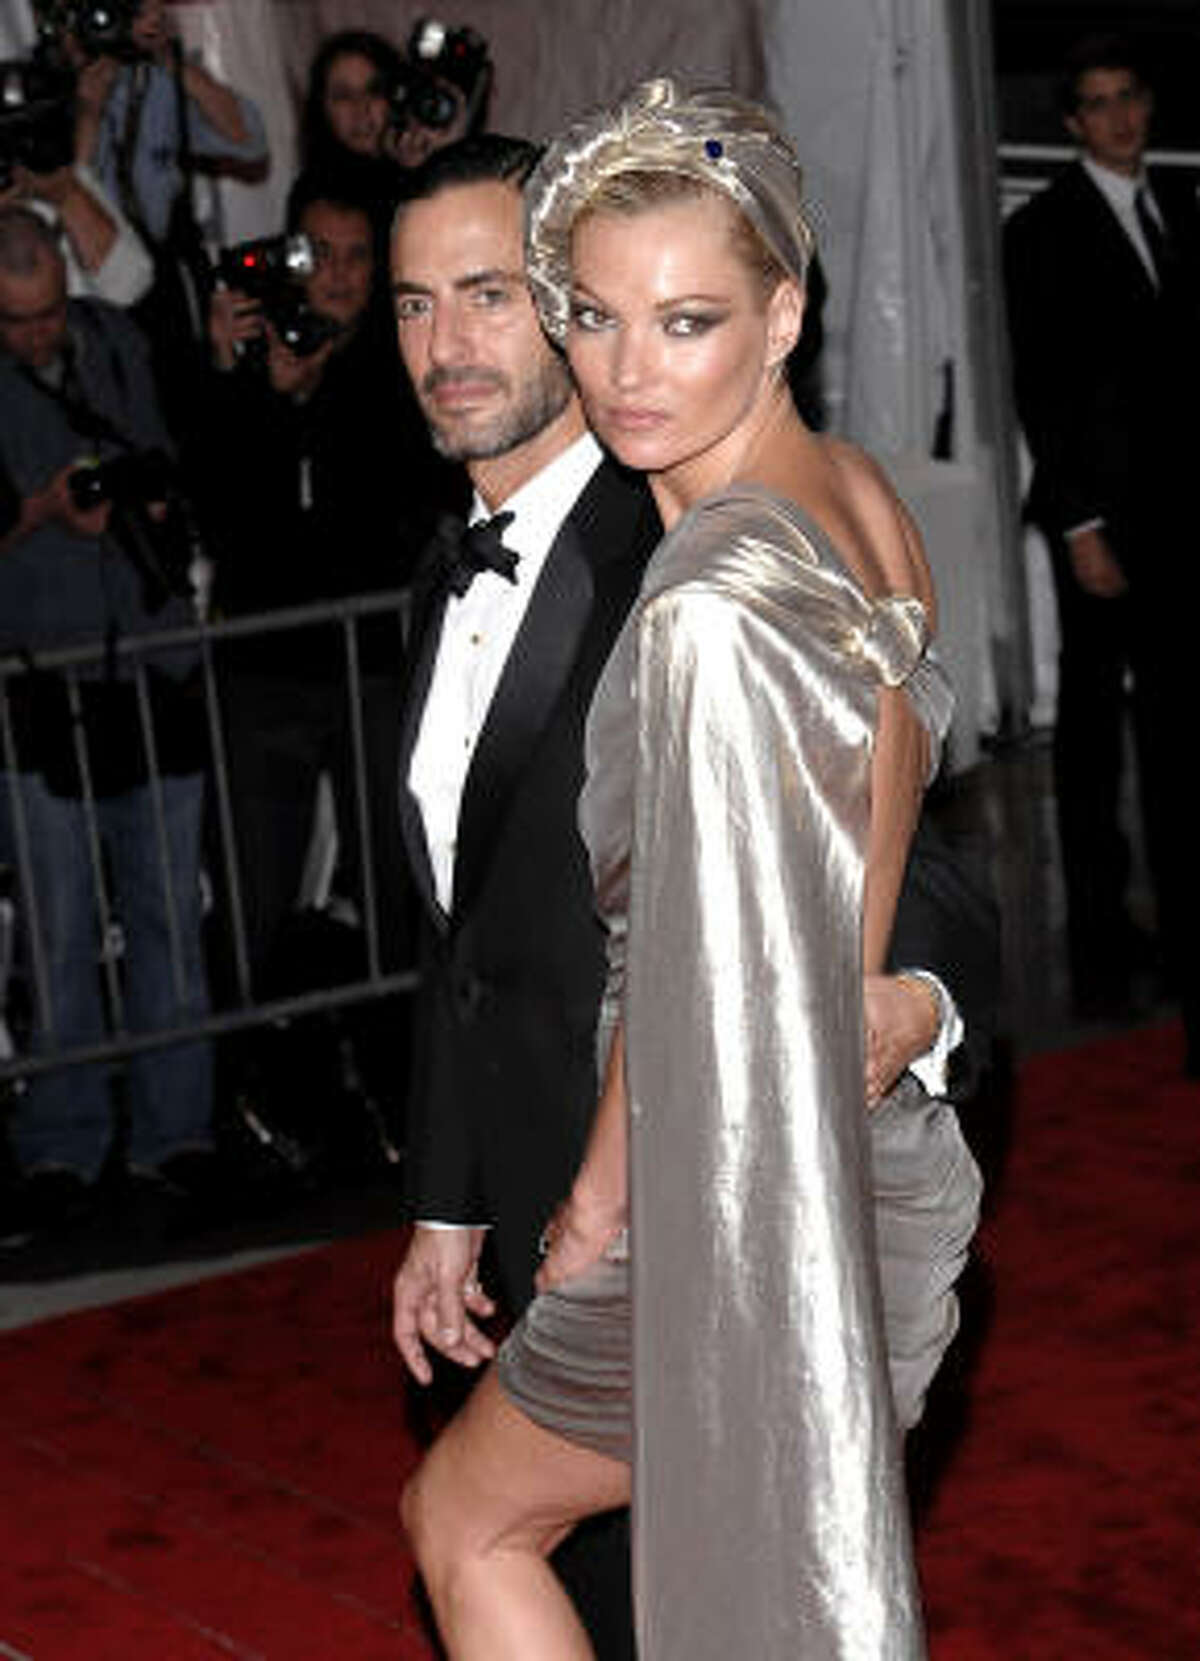 Fashion designer Marc Jacobs and Kate Moss